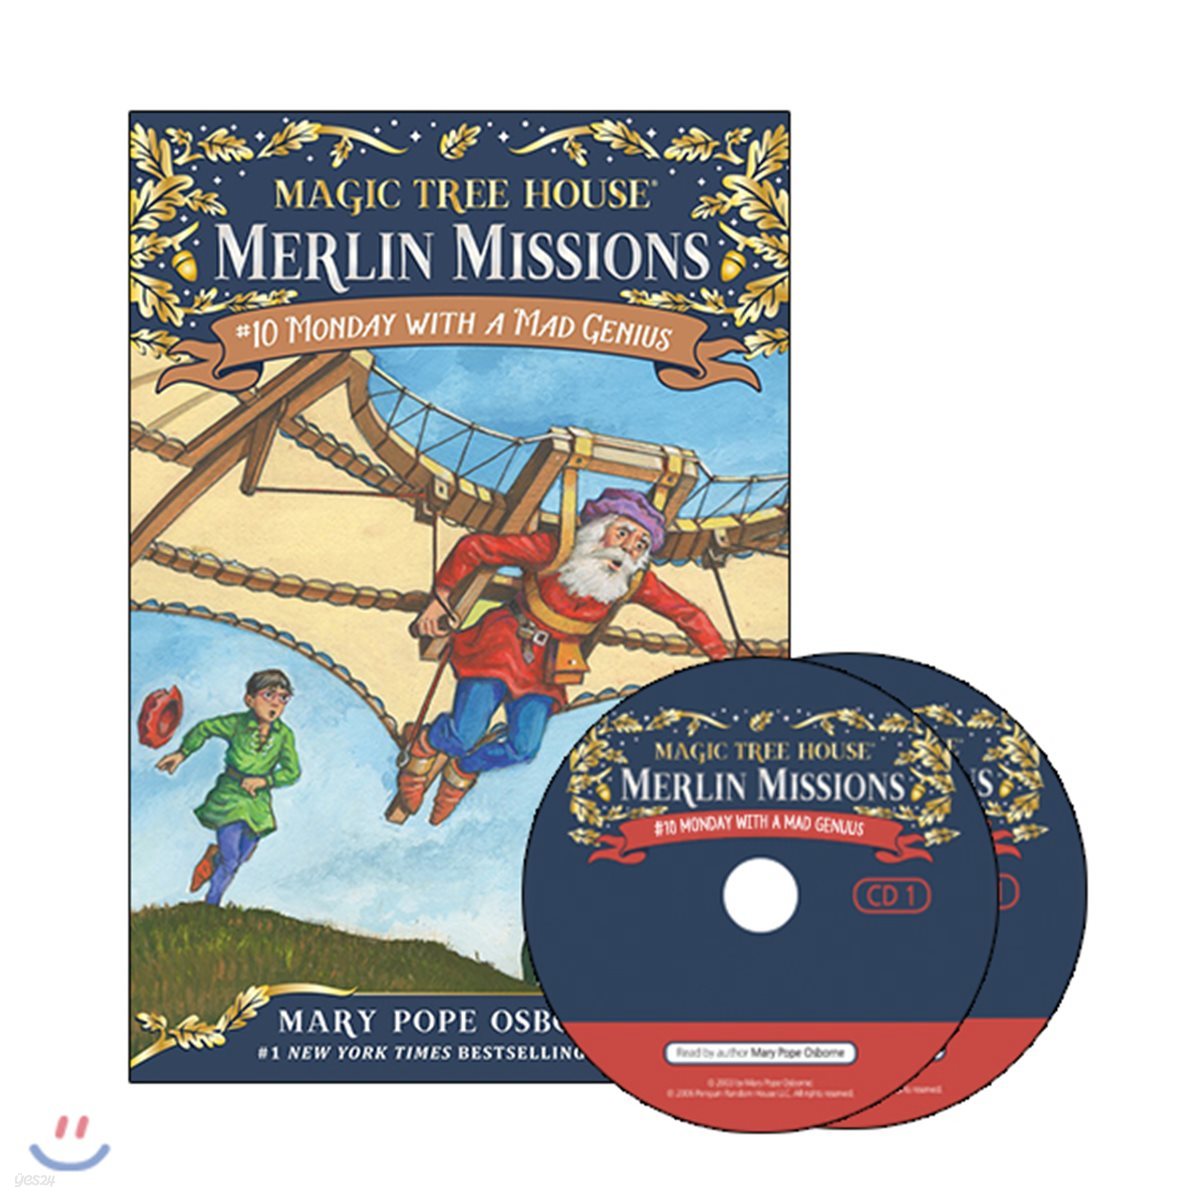 Merlin Mission #10 : Monday with a Mad Genius (Book + CD)